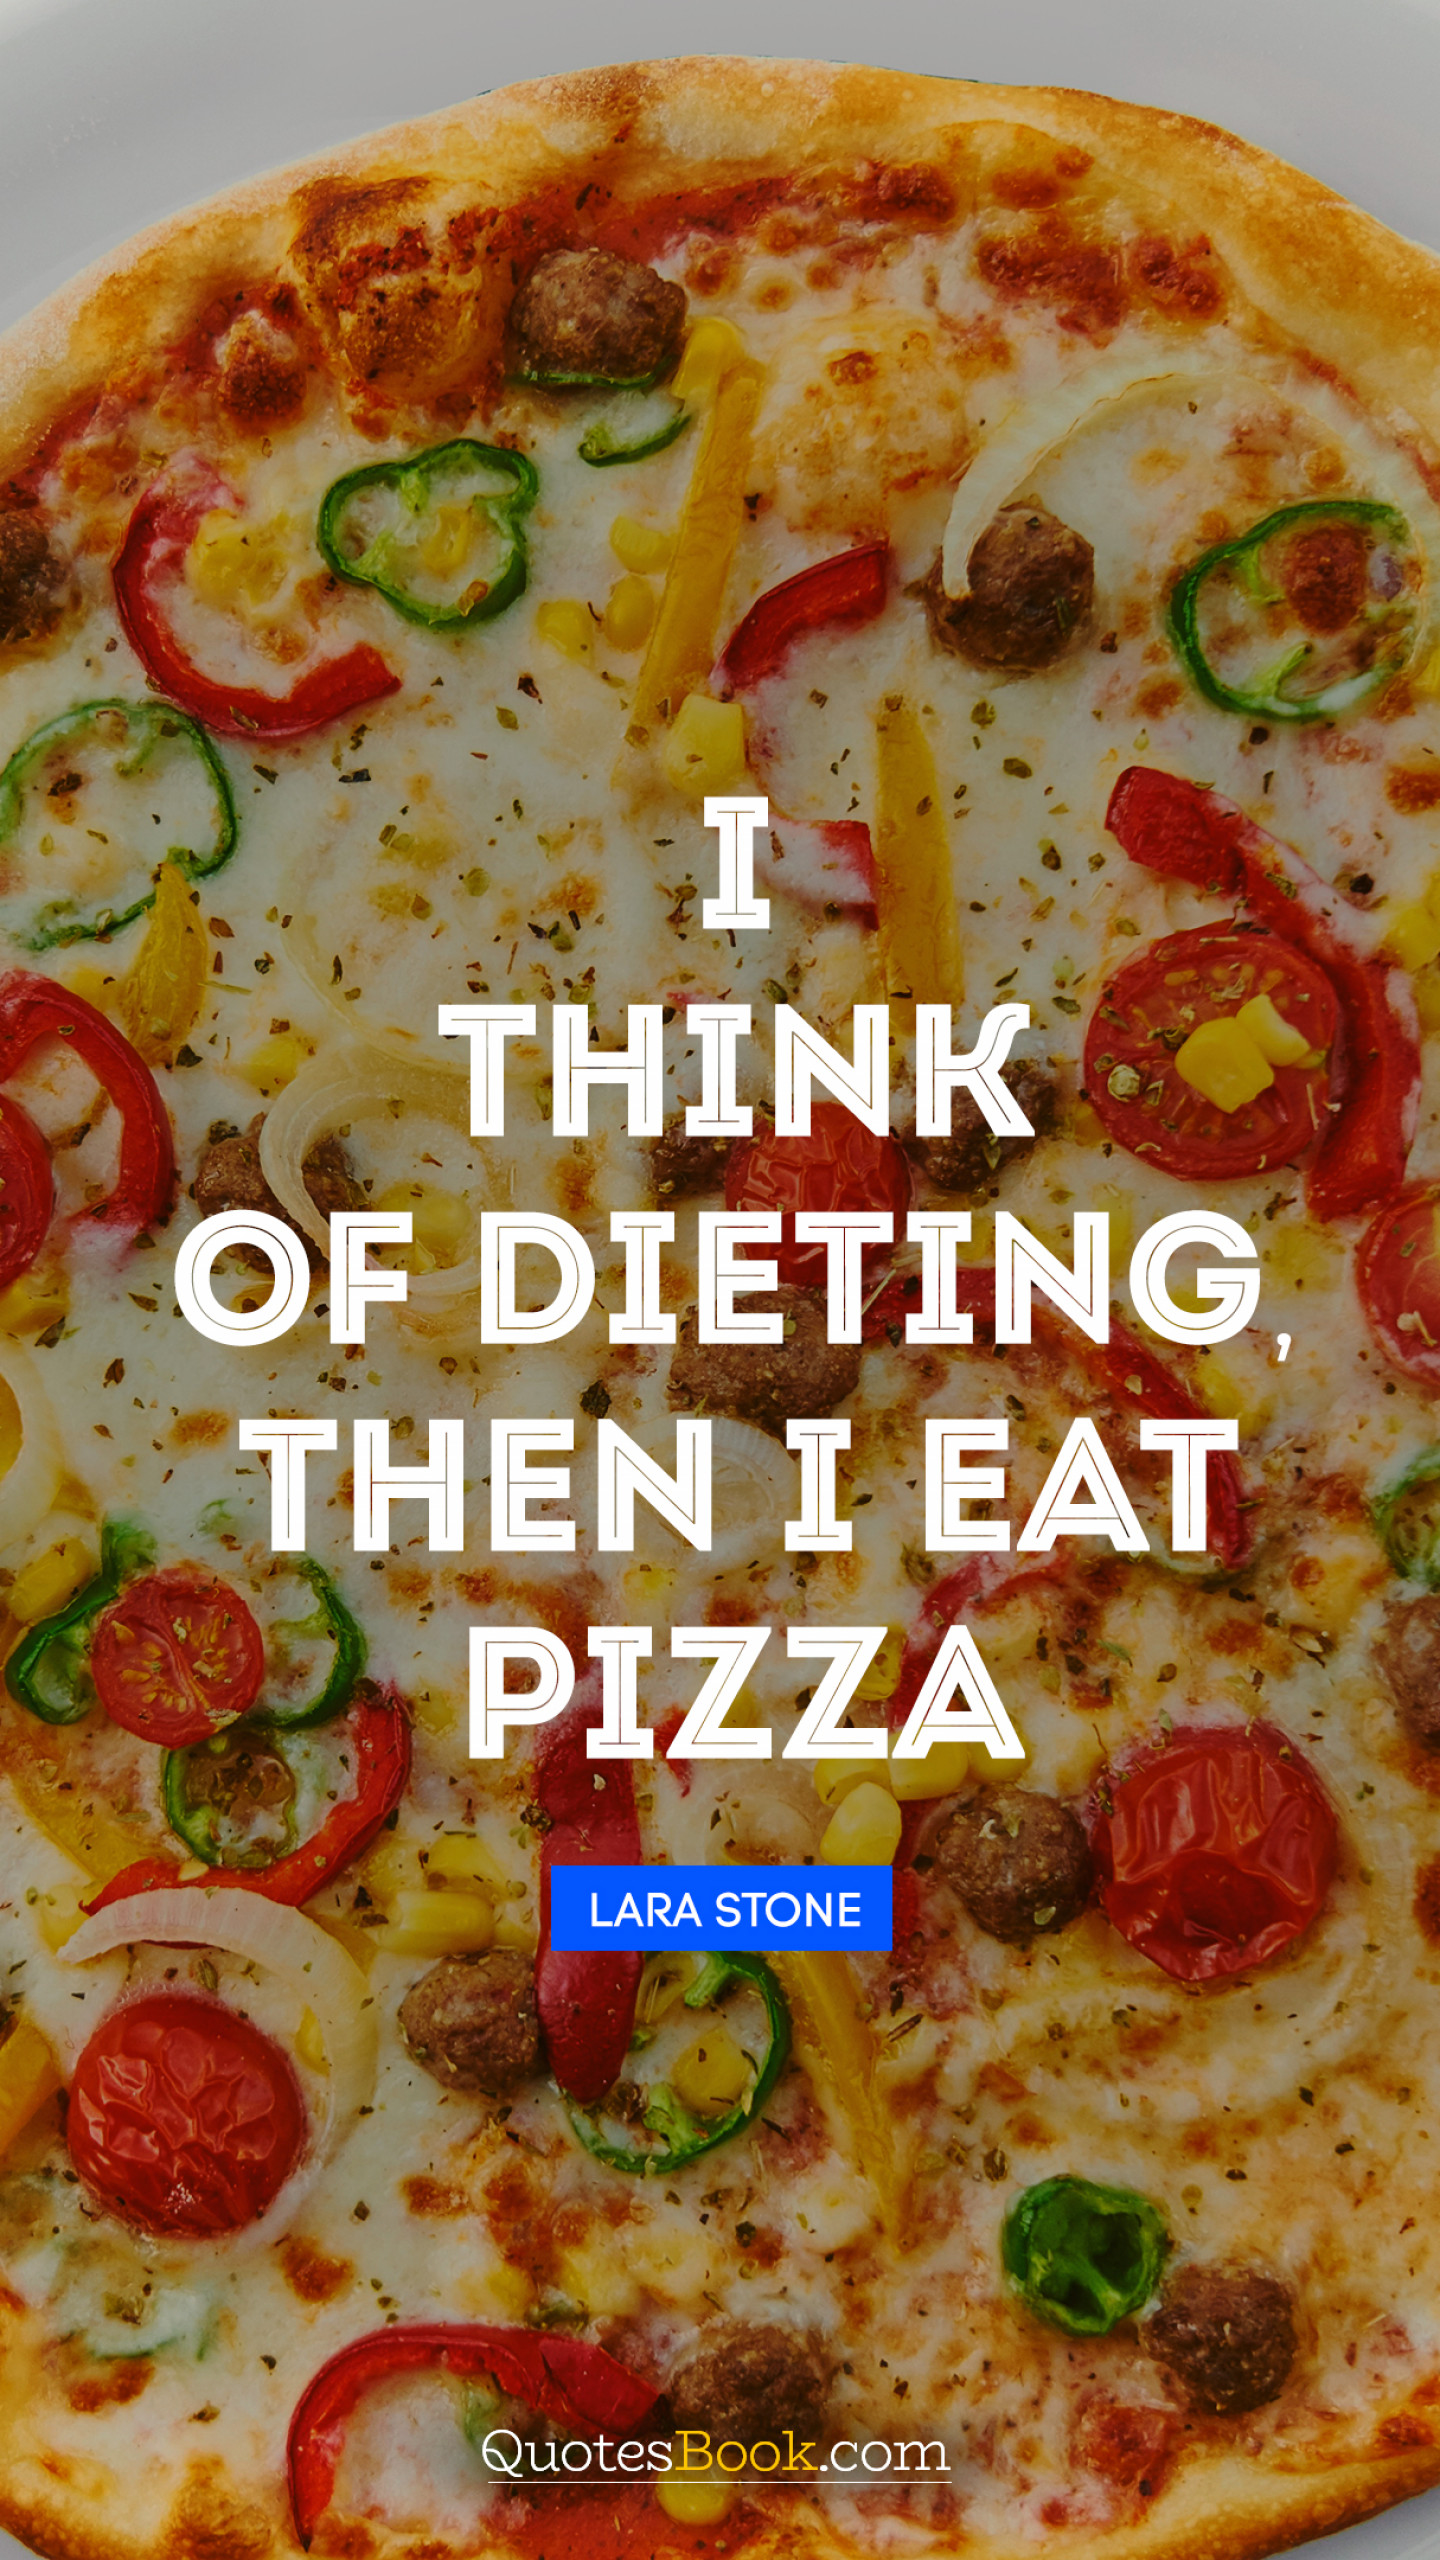 I think of dieting, then I eat pizza. - Quote by Lara Stone - Page 3 -  QuotesBook